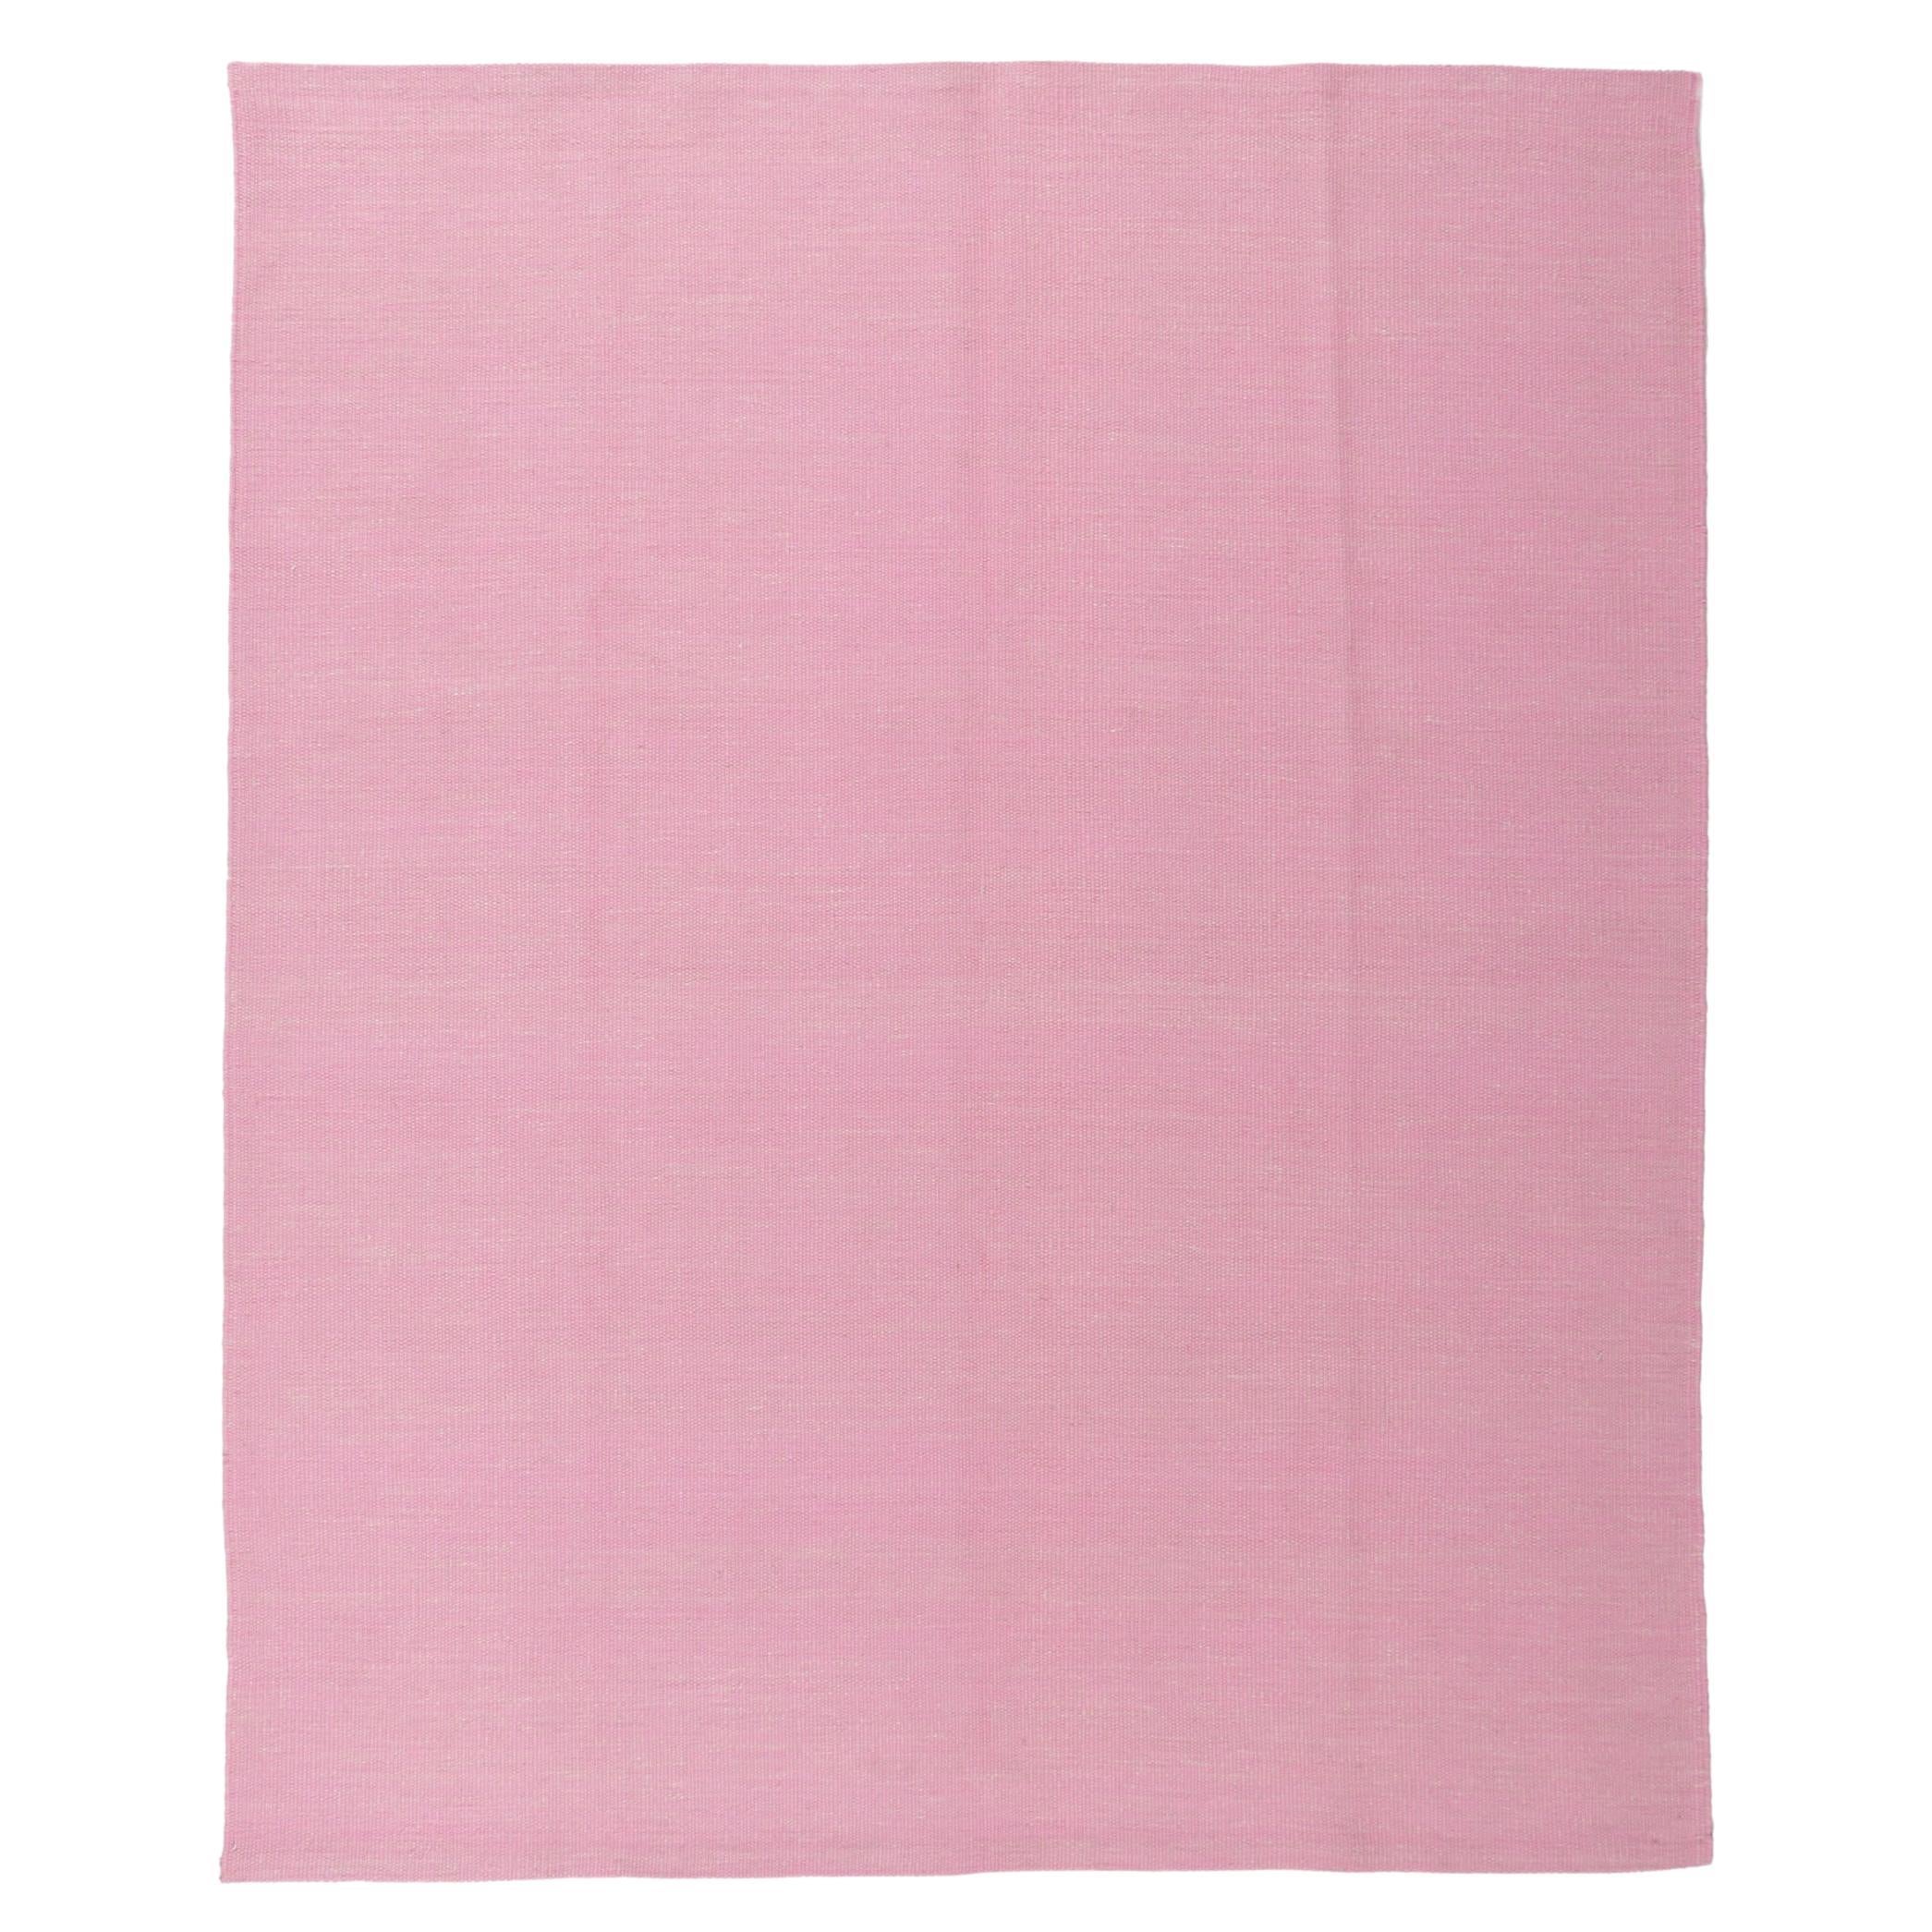 New Swedish Inspired Pink Kilim Rug with Scandinavian Modern Style For Sale